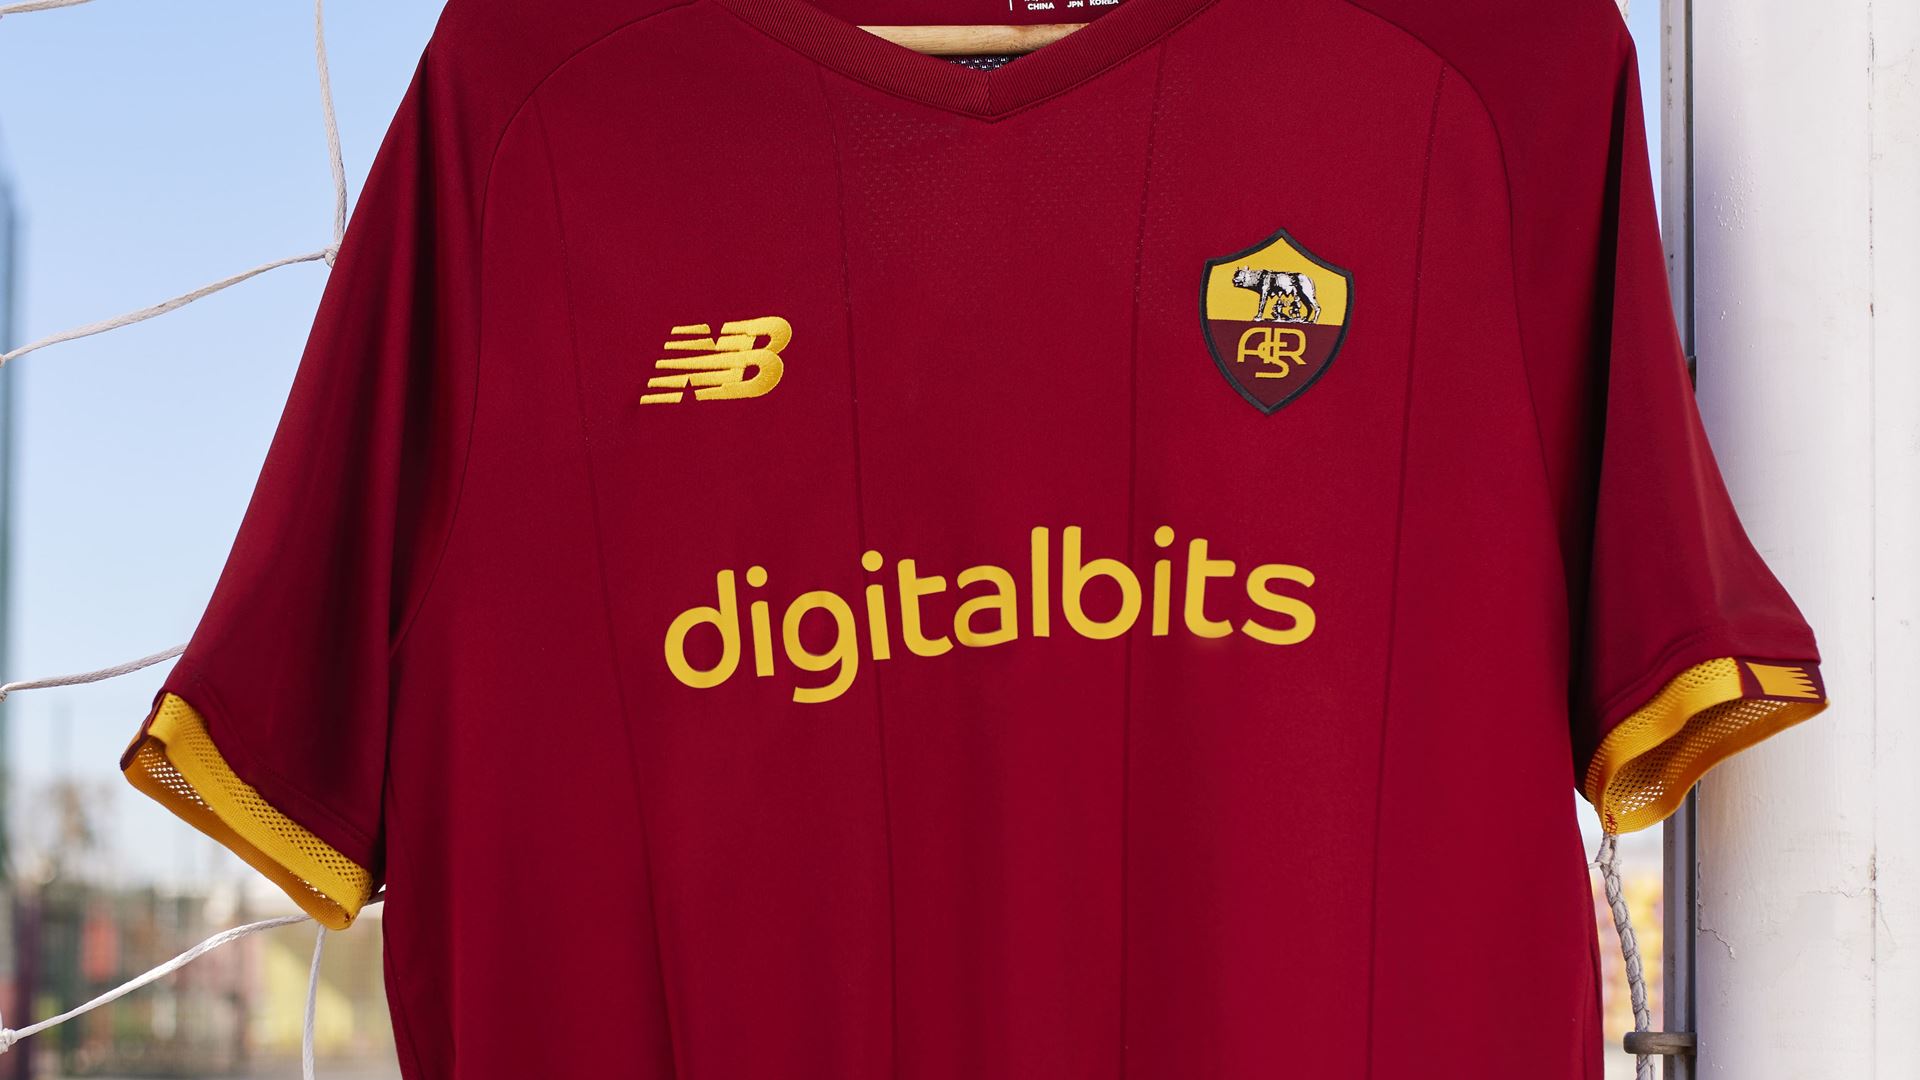 Balance Press Box : New Balance and AS Roma release limited edition Della Capitale shirt